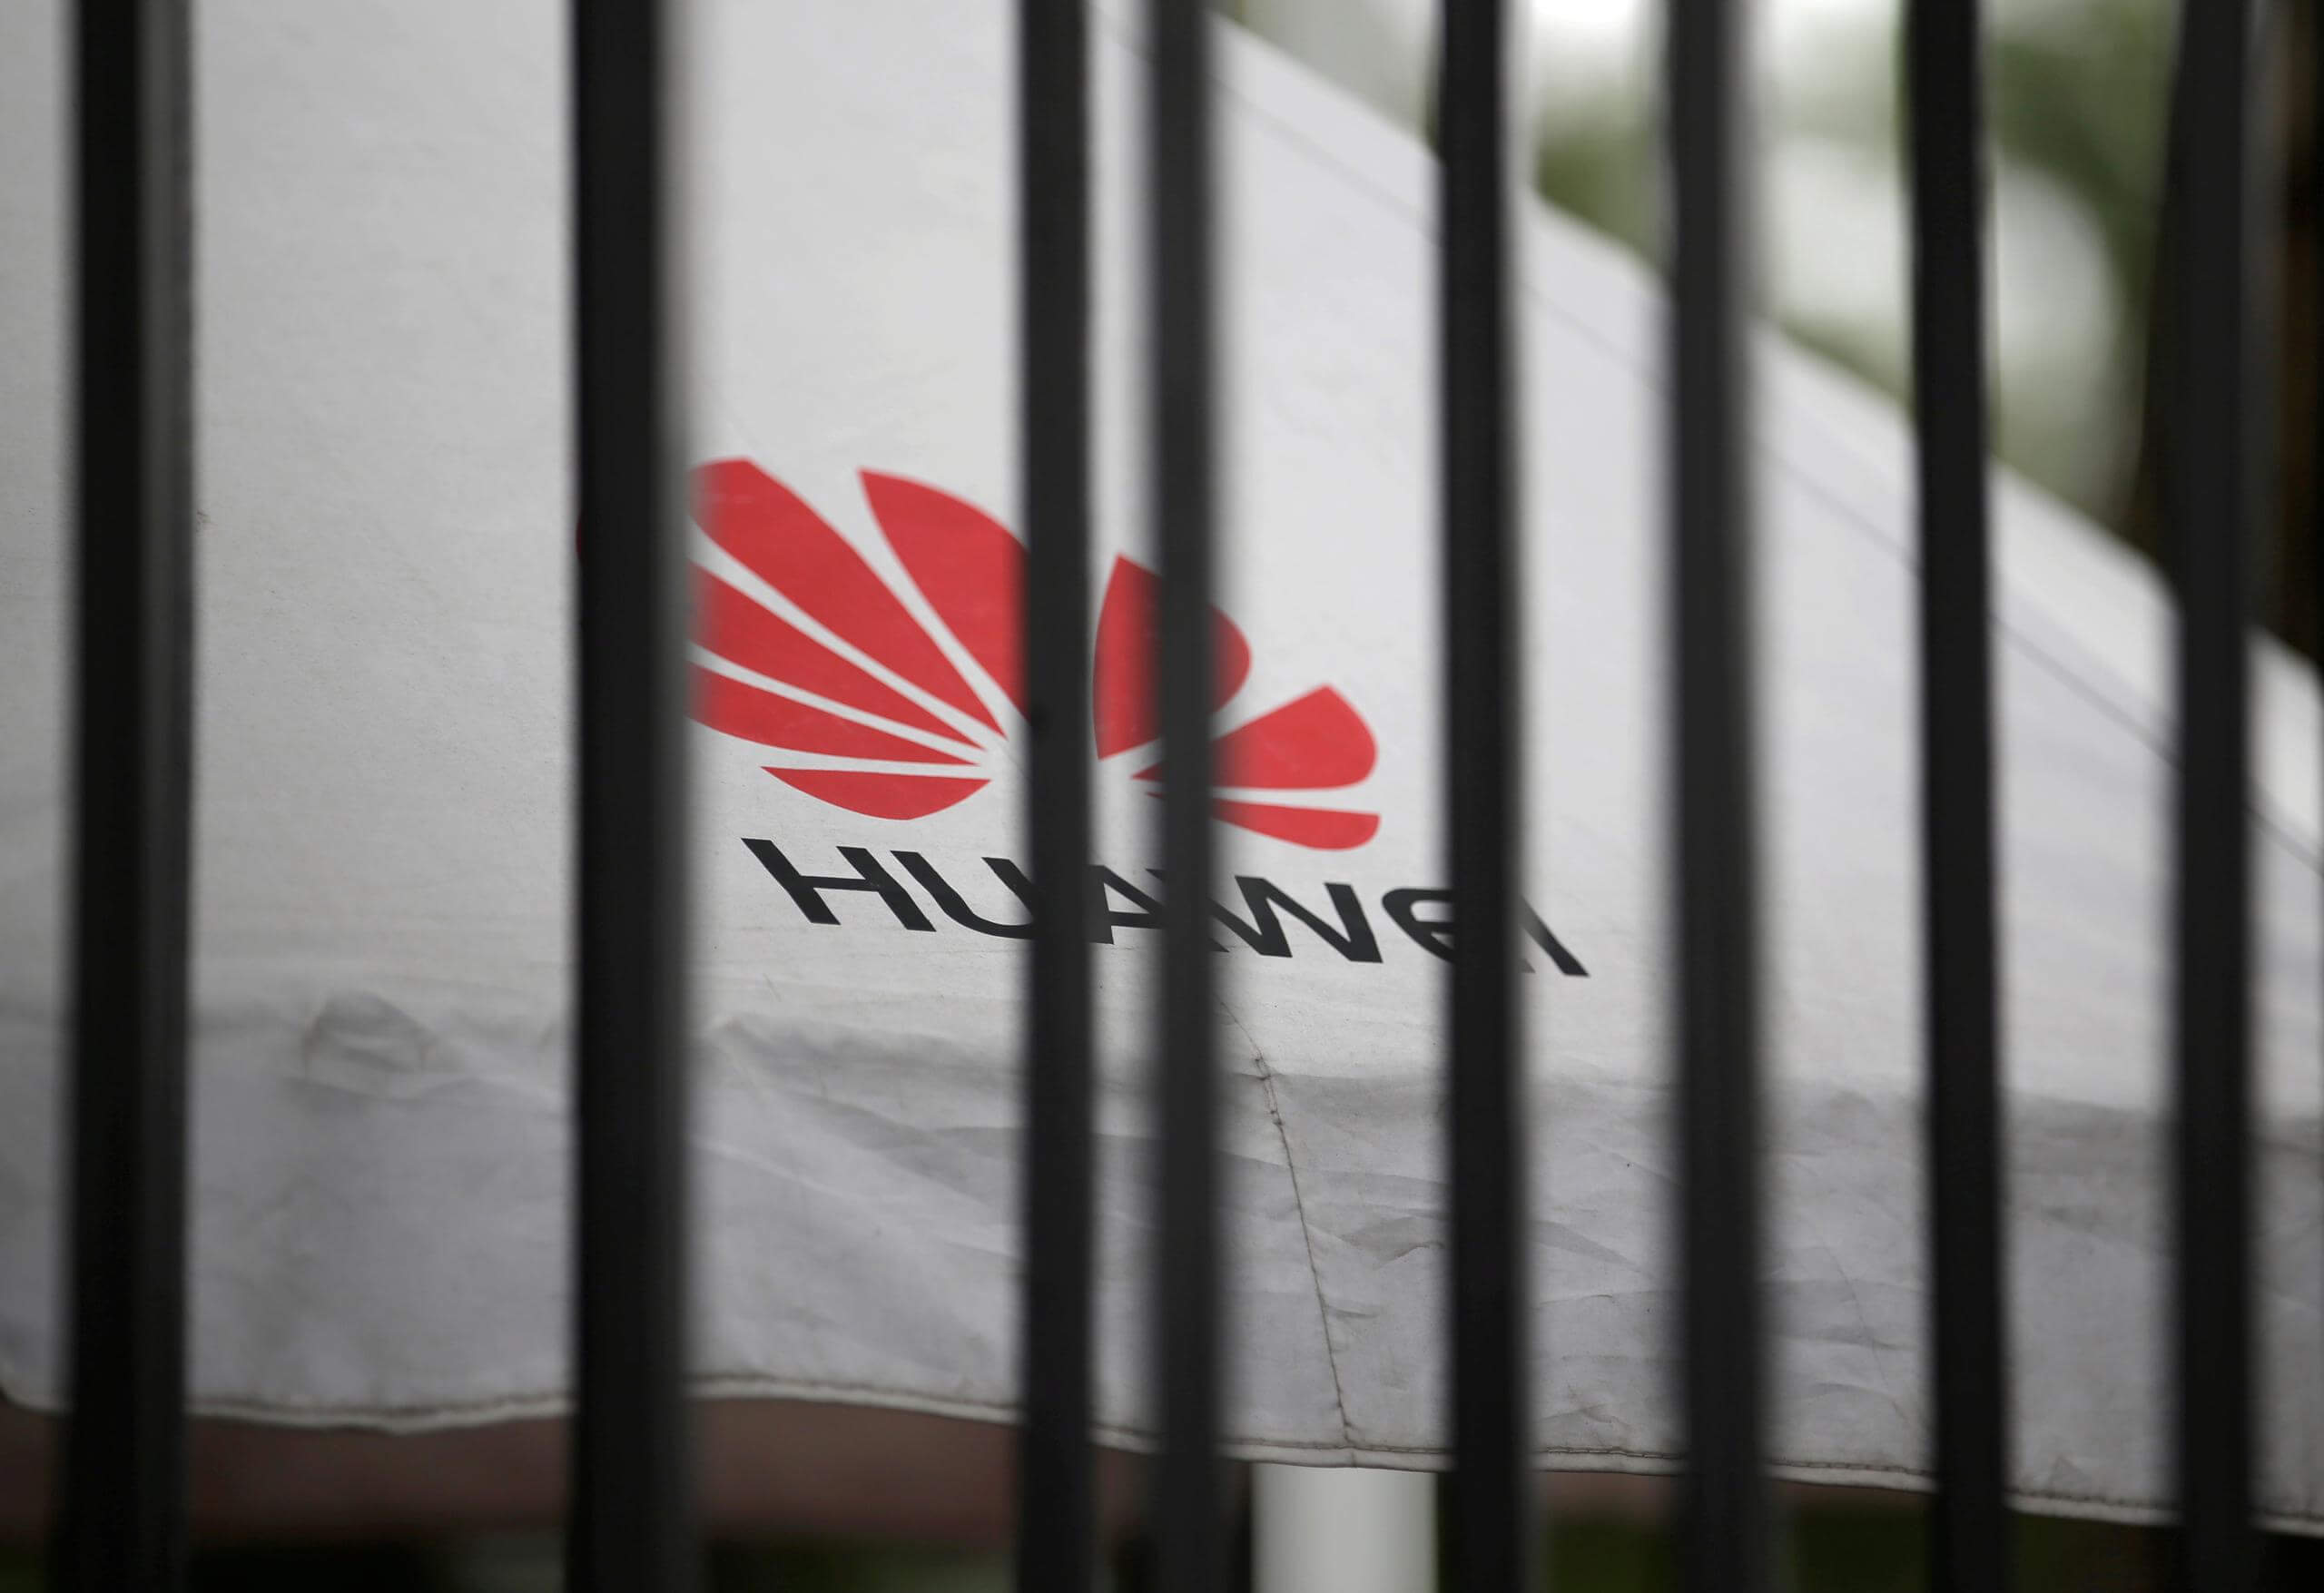 China may be considering restrictions against US chipmakers amid renewed Huawei ban